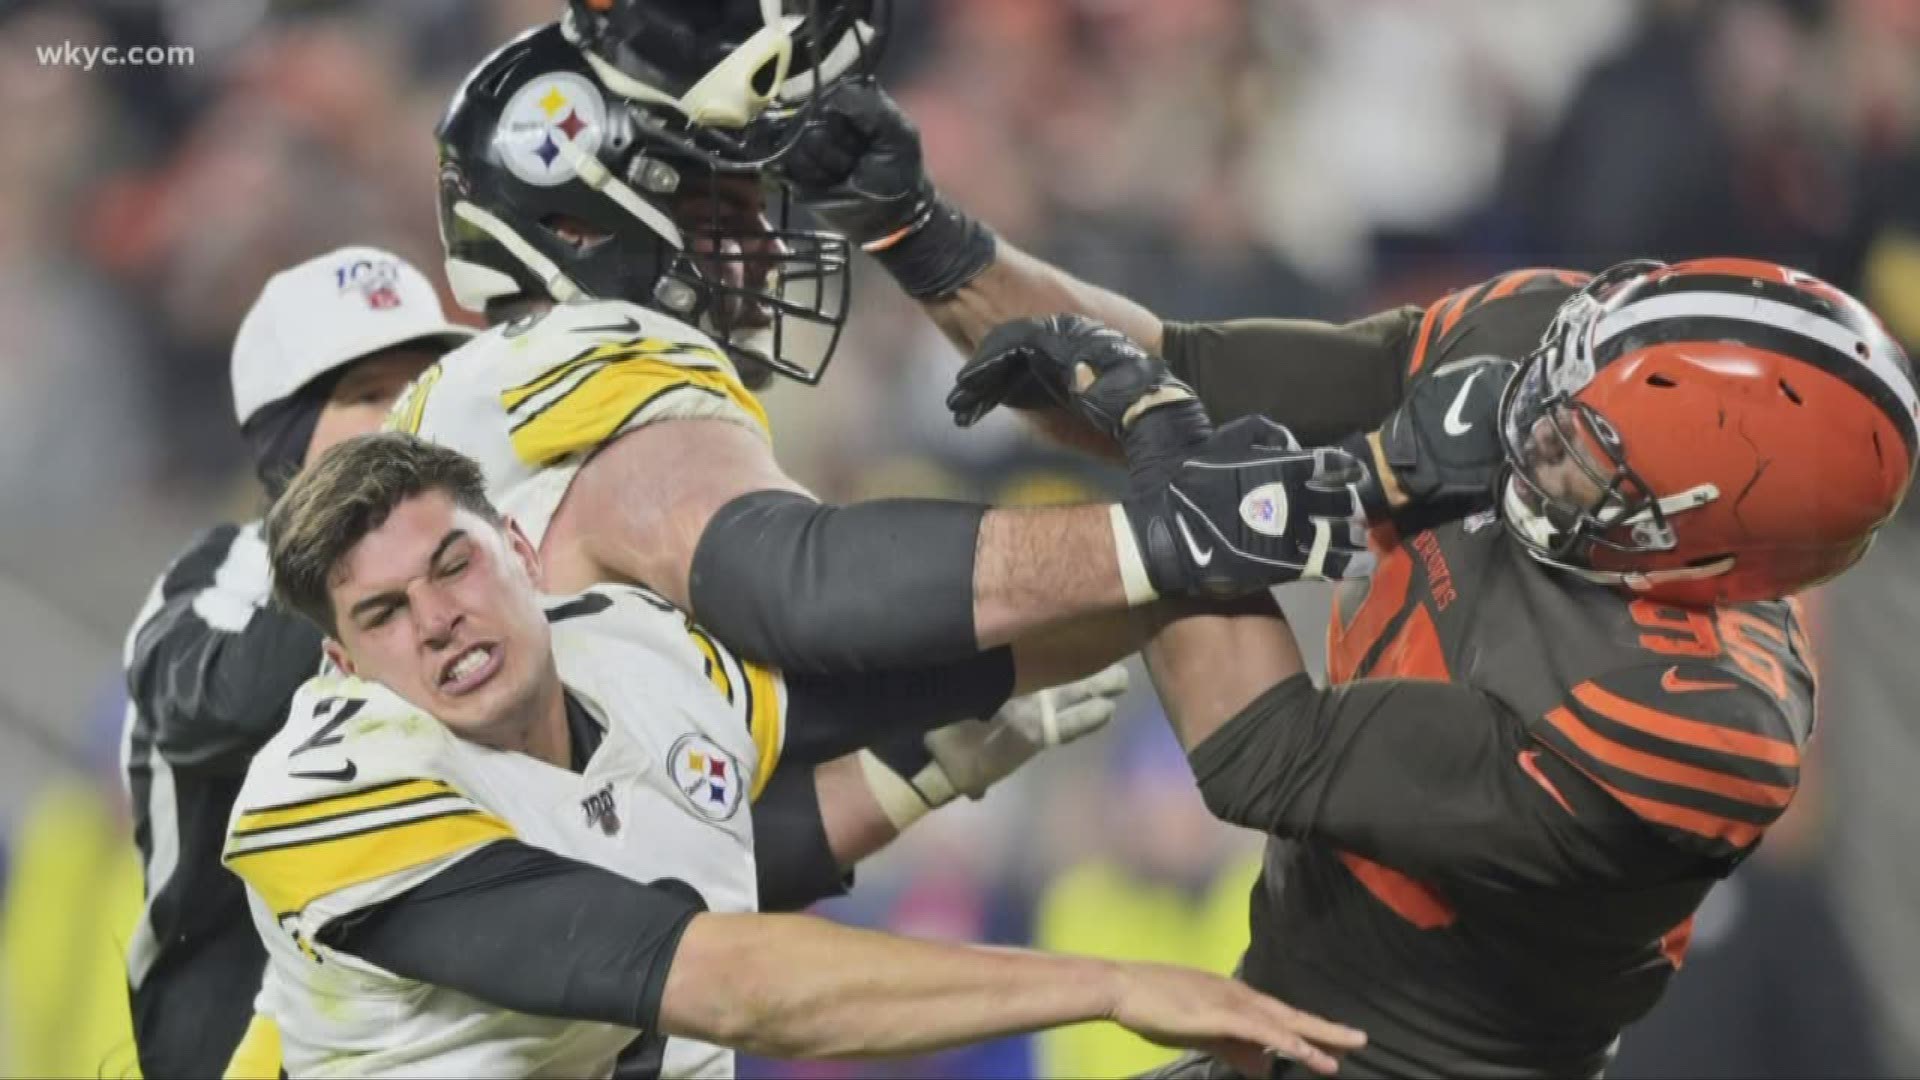 Social media had plenty to say about the fight between Myles Garrett and Mason Rudolph that ended the Cleveland Browns' game vs. the Pittsburgh Steelers.